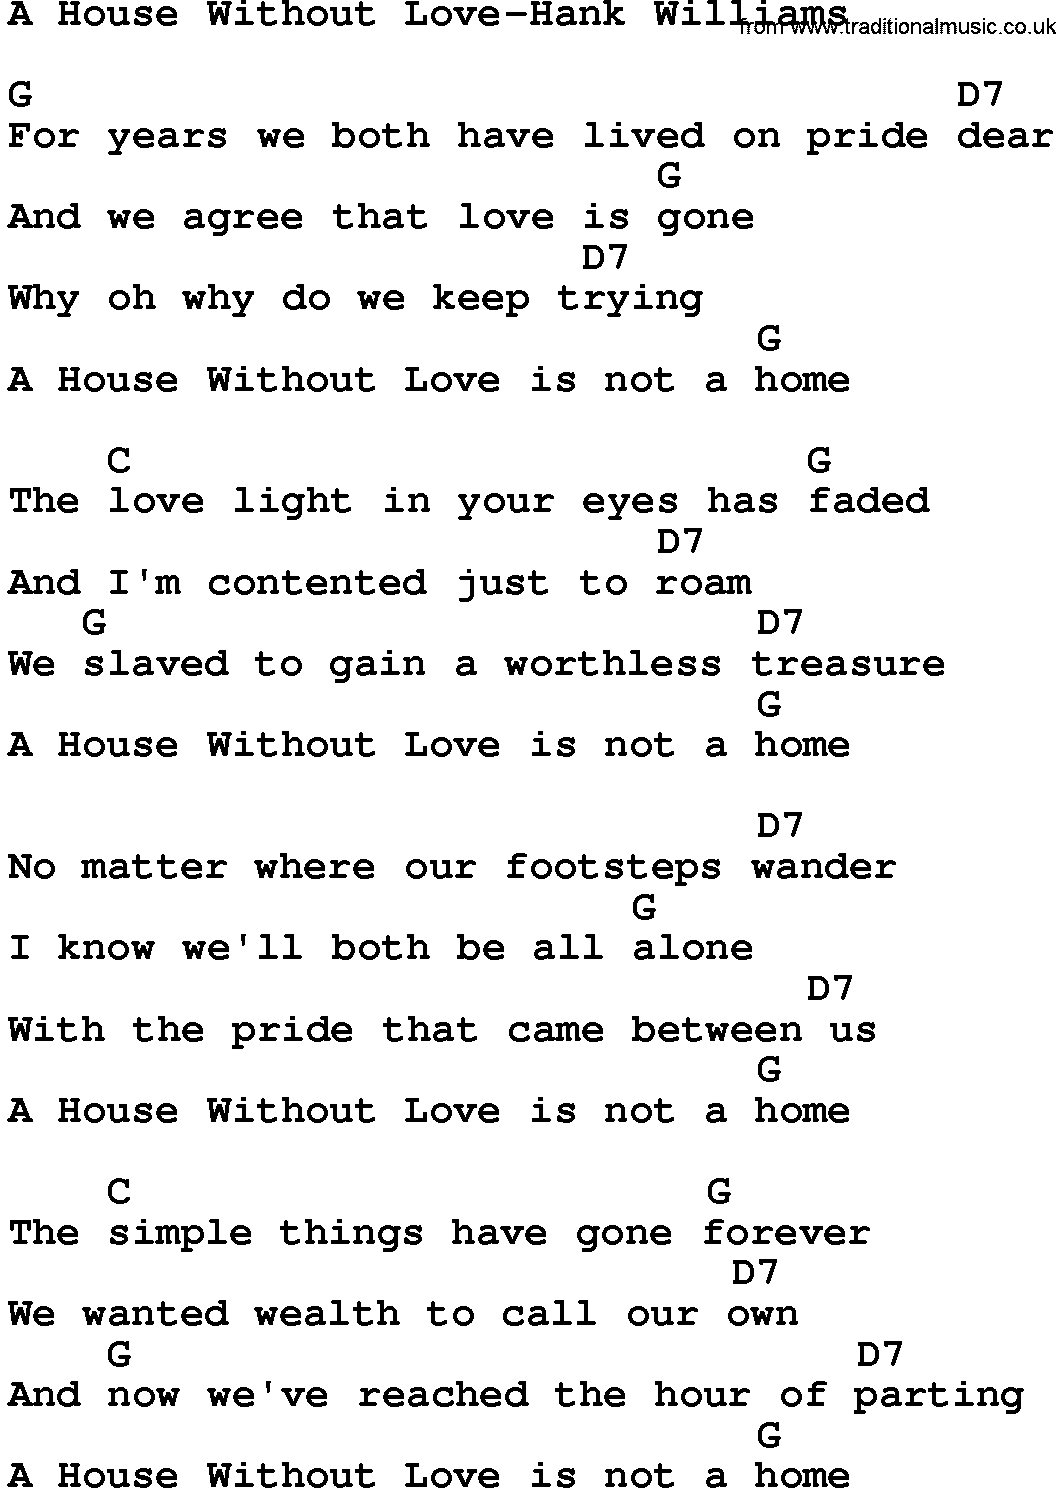 Country music song: A House Without Love-Hank Williams lyrics and chords